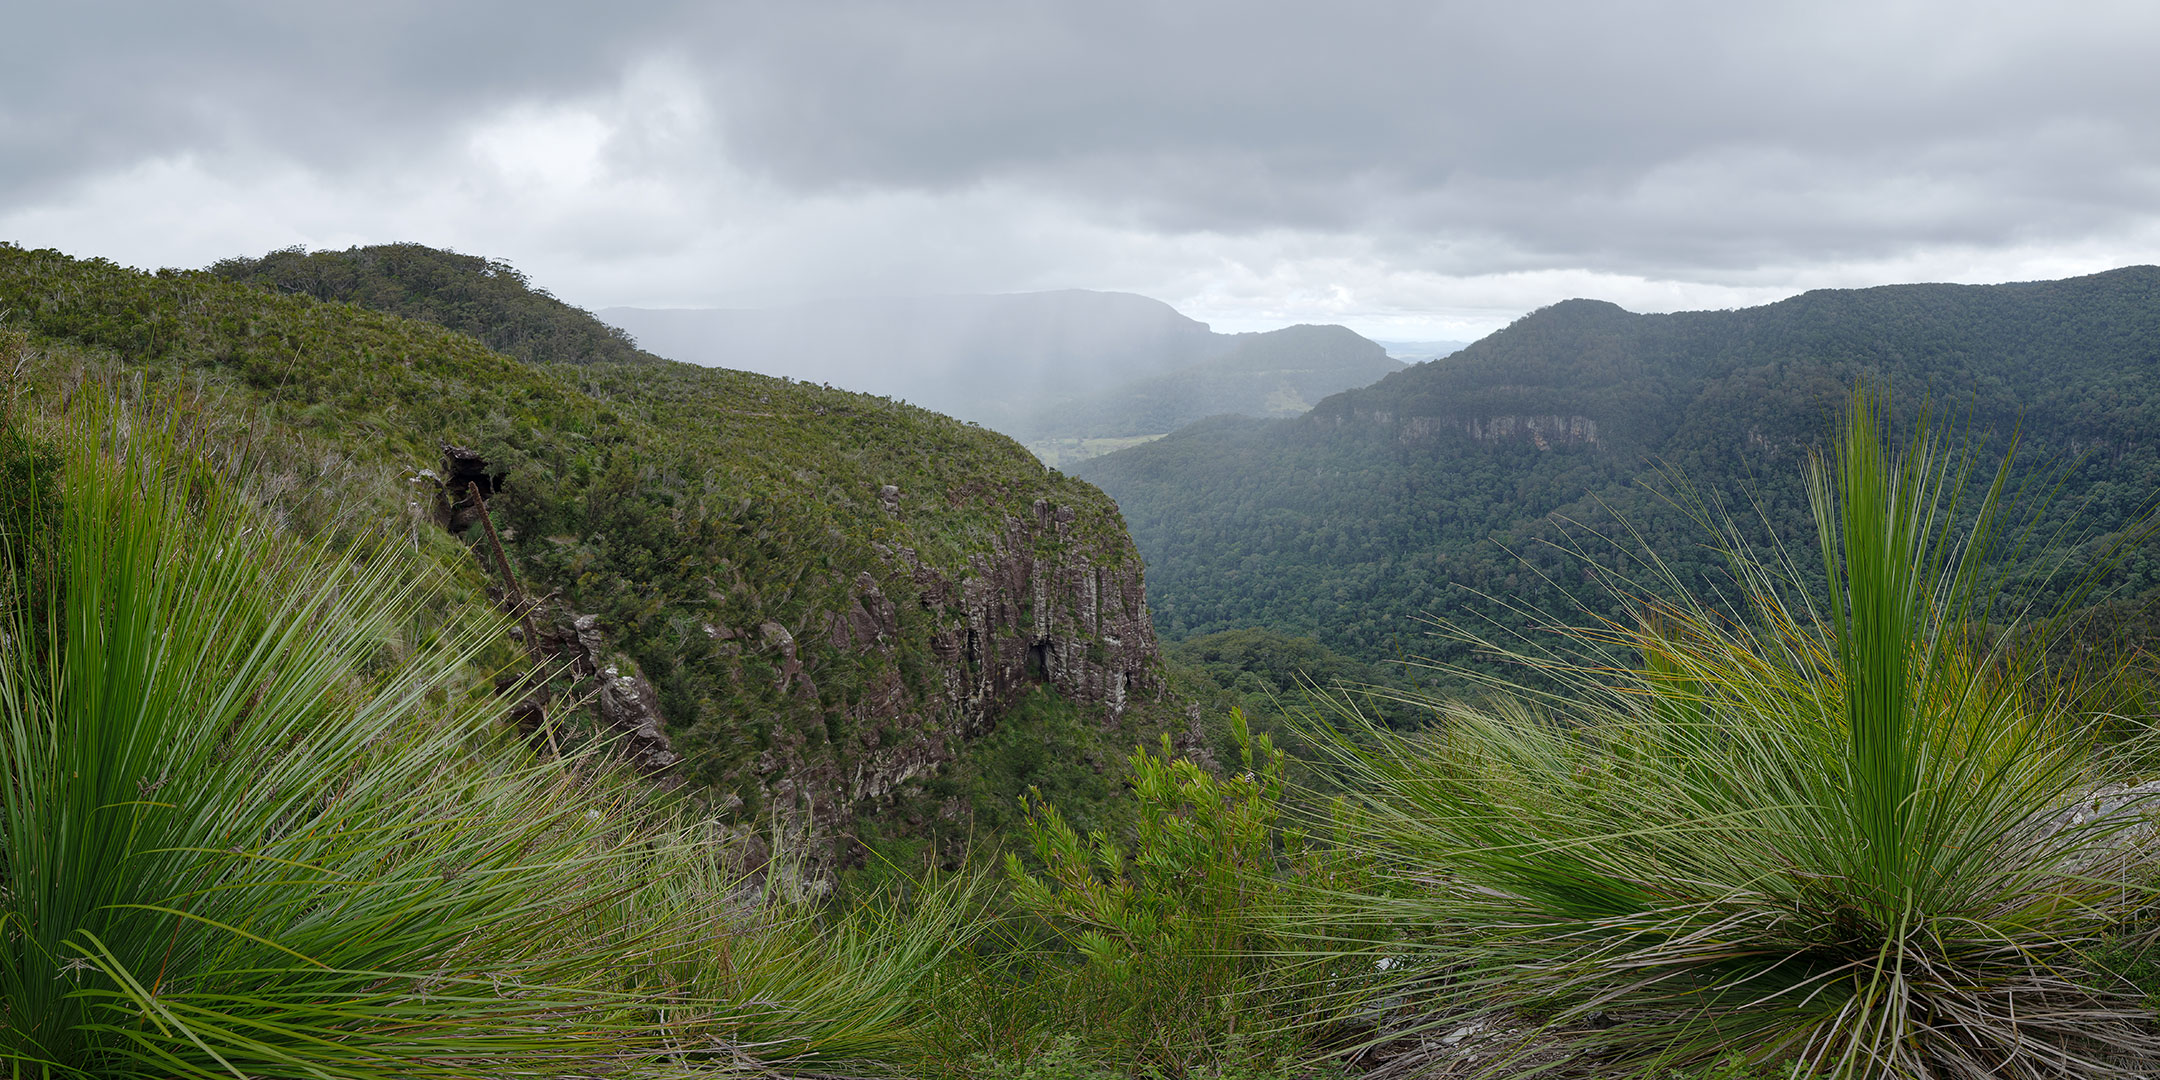 Rain approaching a rugged lookout on Dave's Creek Circuit in Lamington National Park, Australia